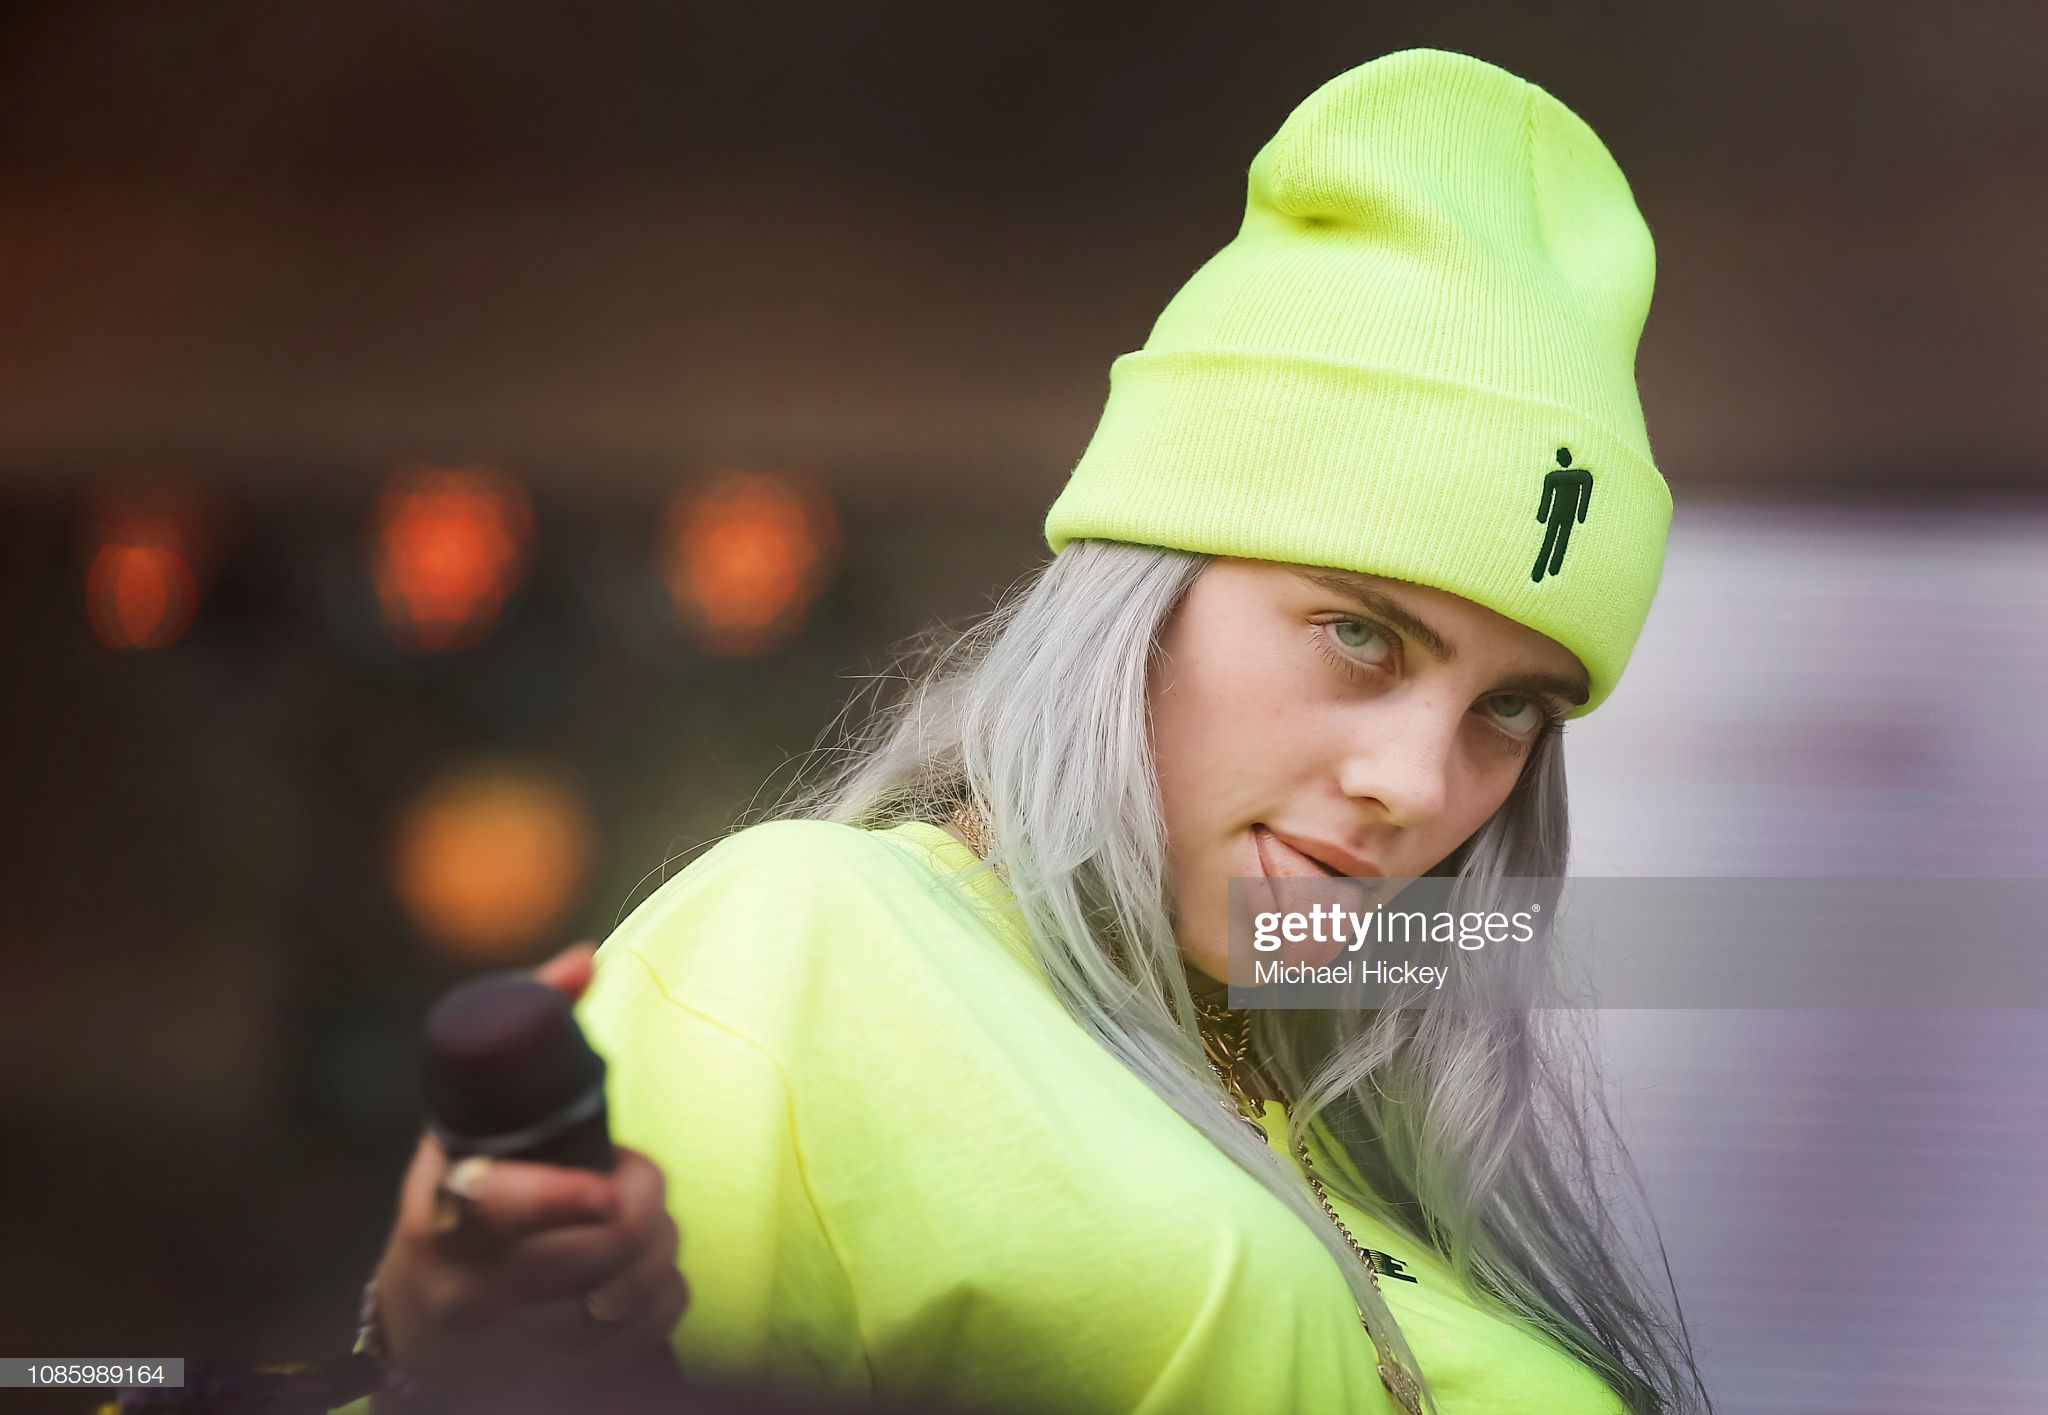 gettyimages-1085989164-2048x2048.jpg